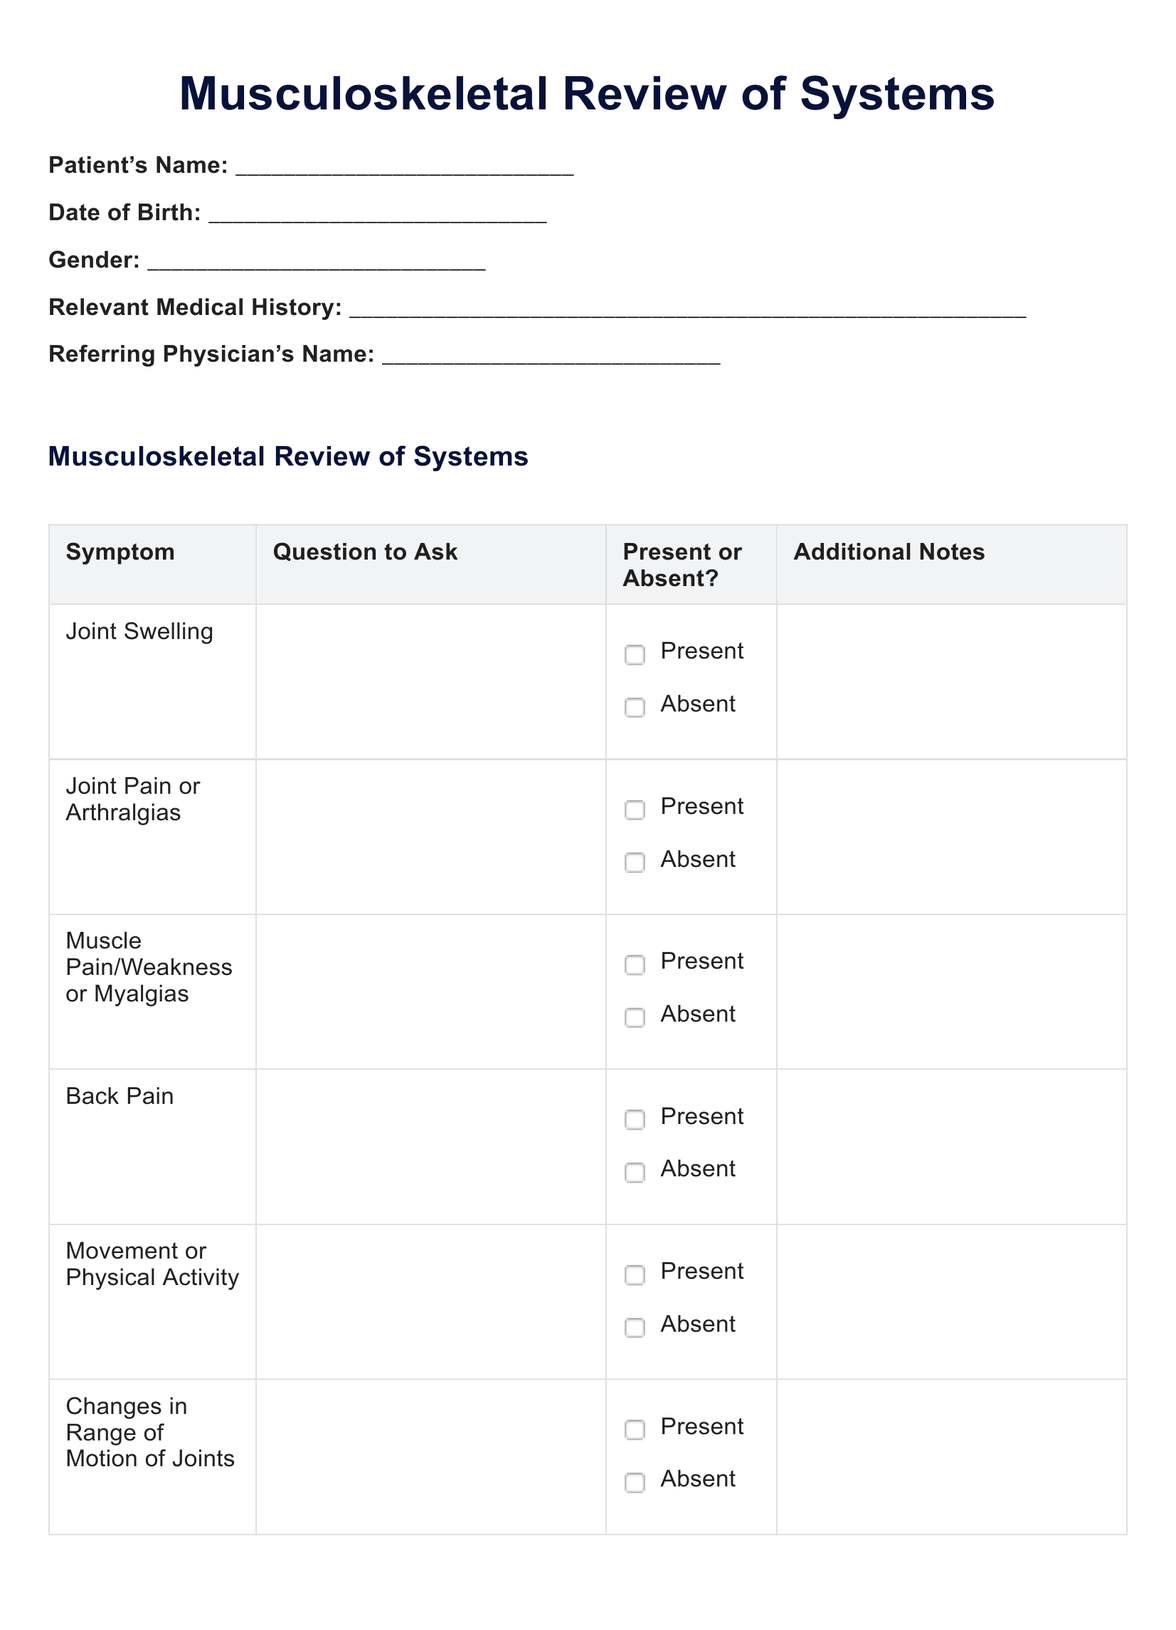 Musculoskeletal Review Of Systems PDF Example